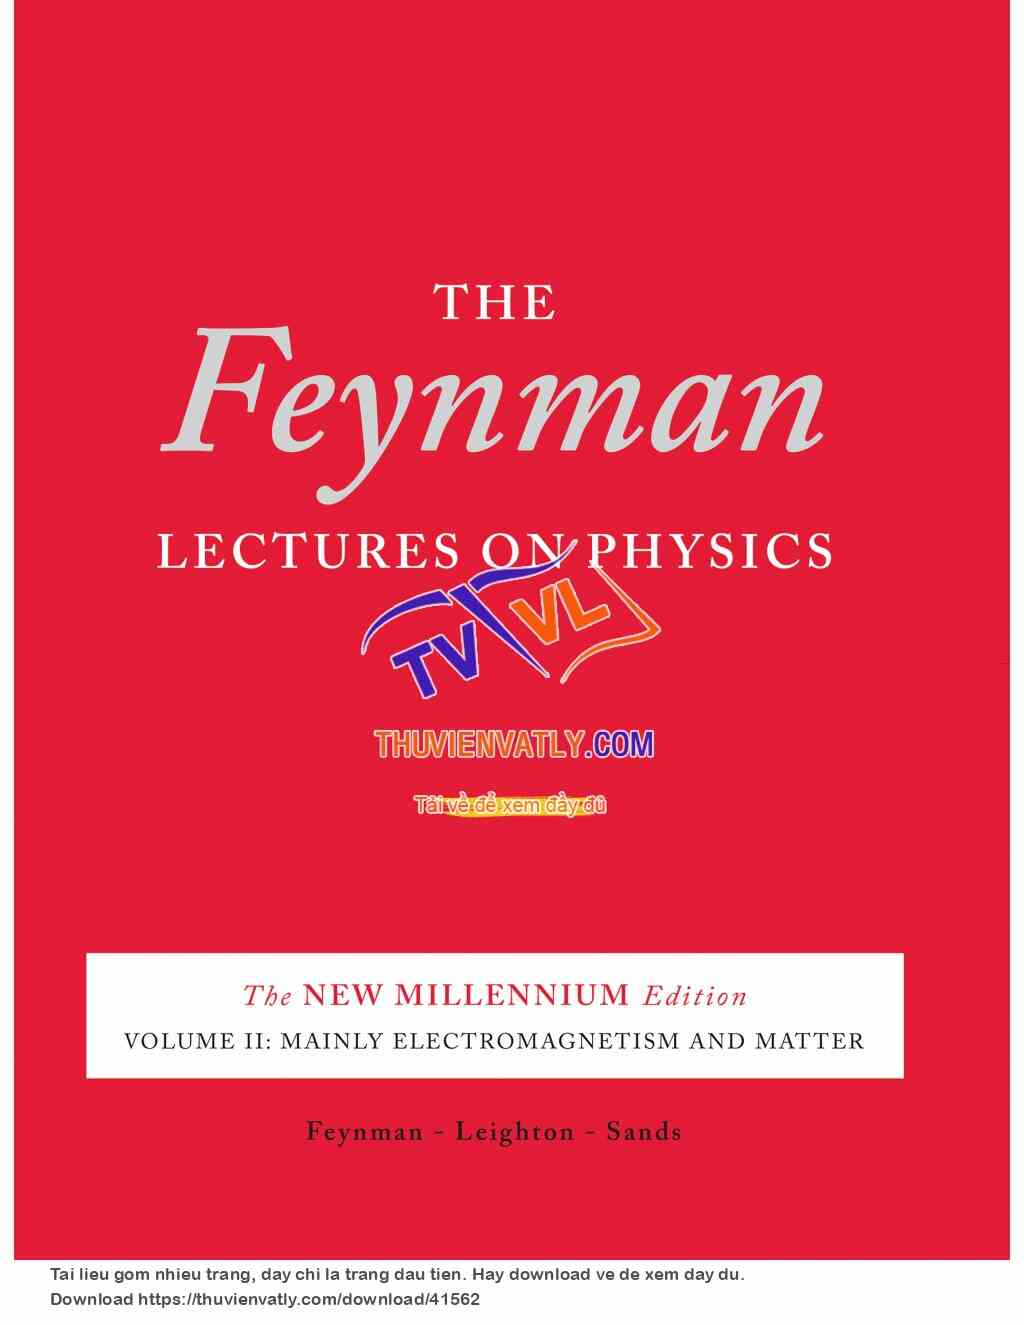 The Feynman Lectures on Physics II - The New Millennium Edition